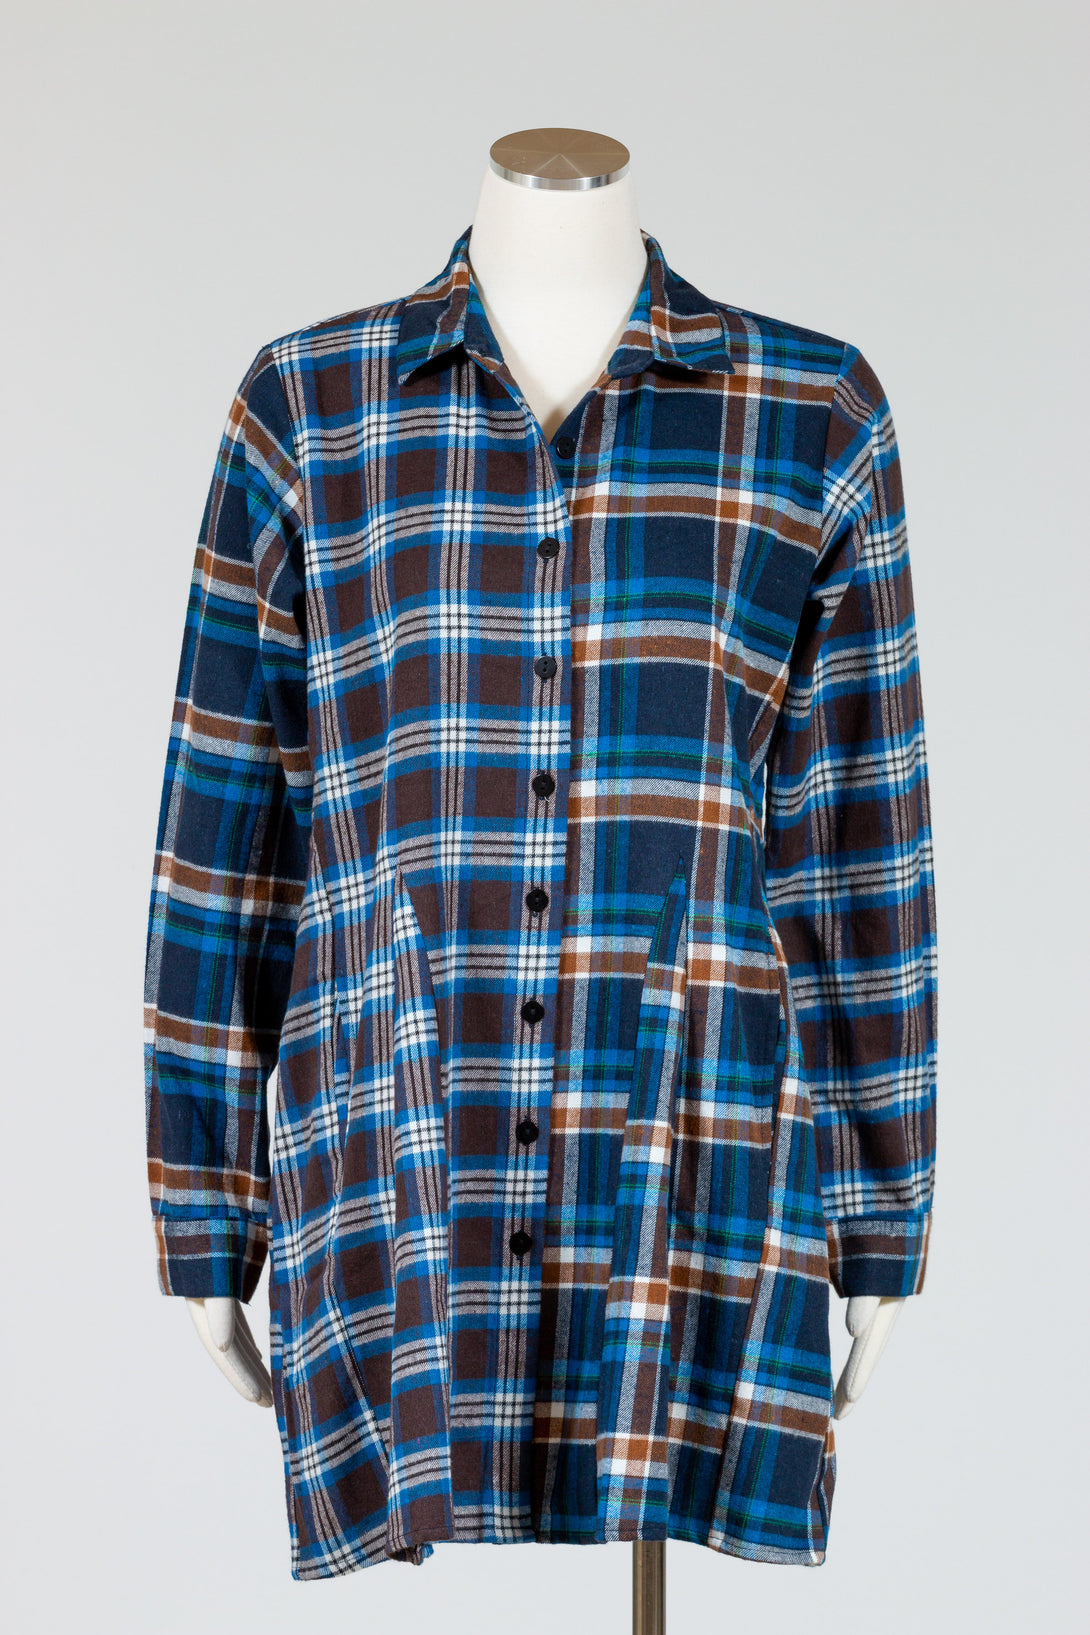 Tulip's Delphine Top is a collared button down brushed cotton shirt in blue plaid for sale at Lissa the Shop.